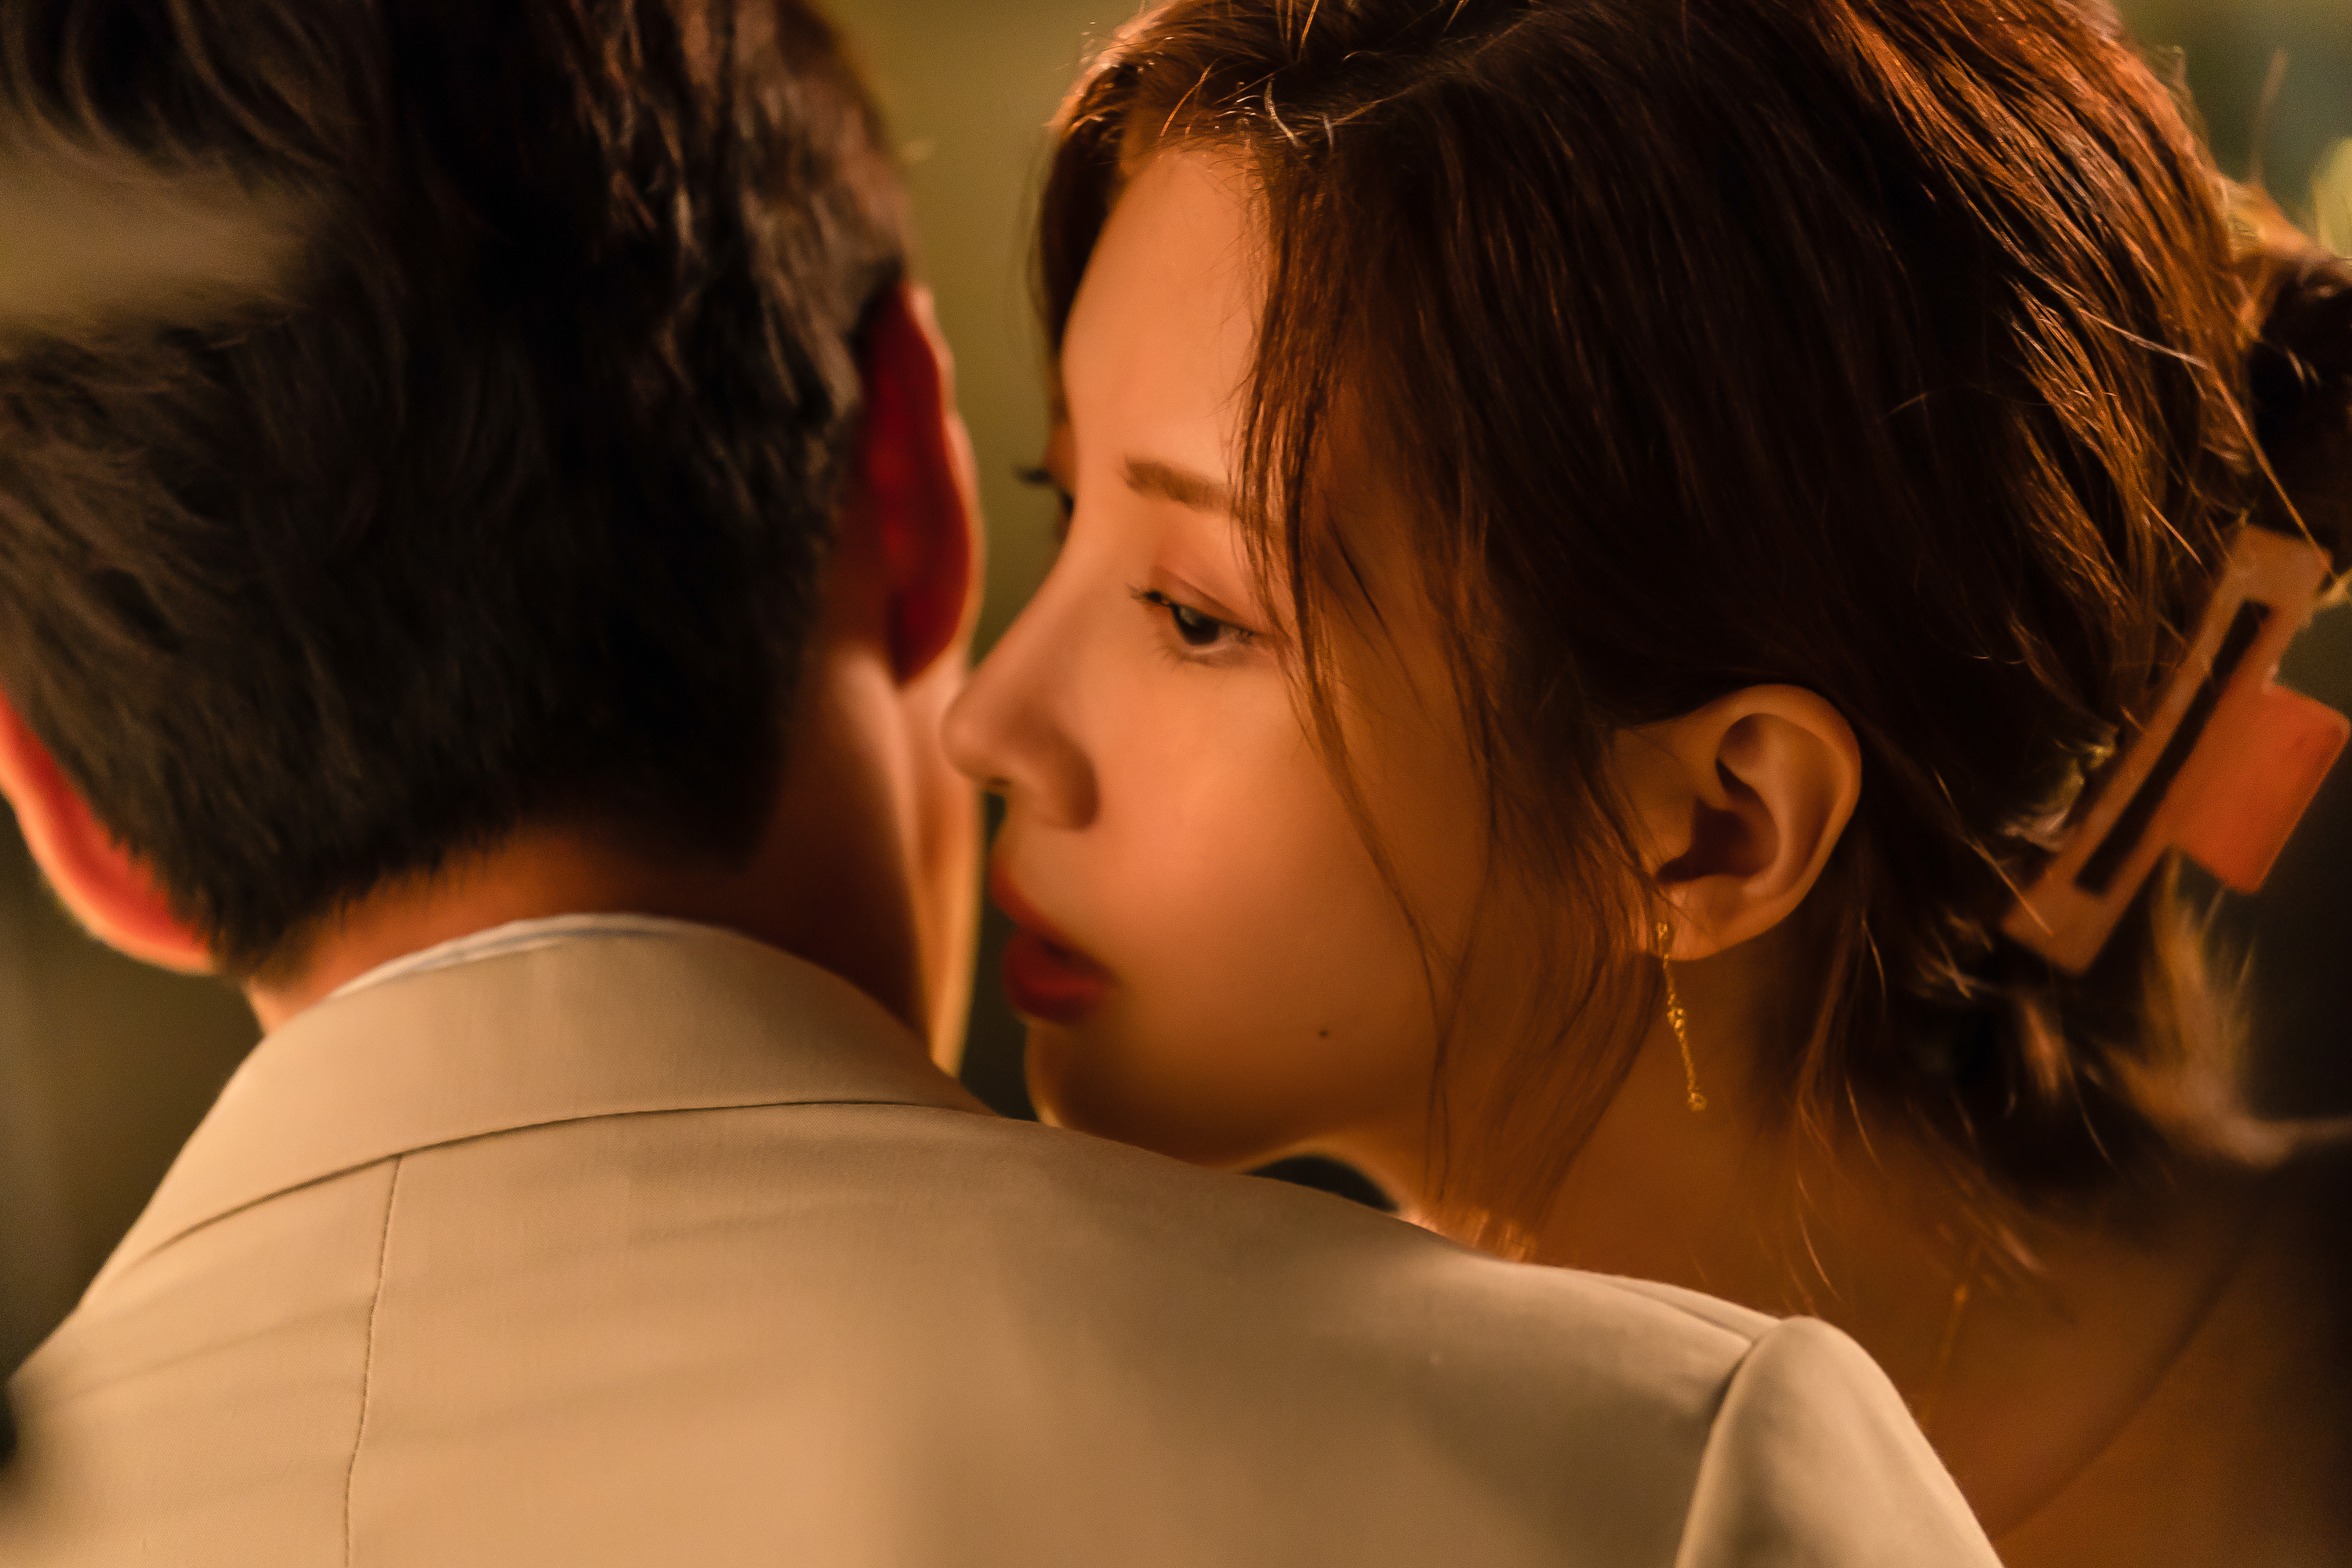 Netflix Love and Leashes Release Date, Cast Starring Seohyun, Trailer and SandM Plot pic